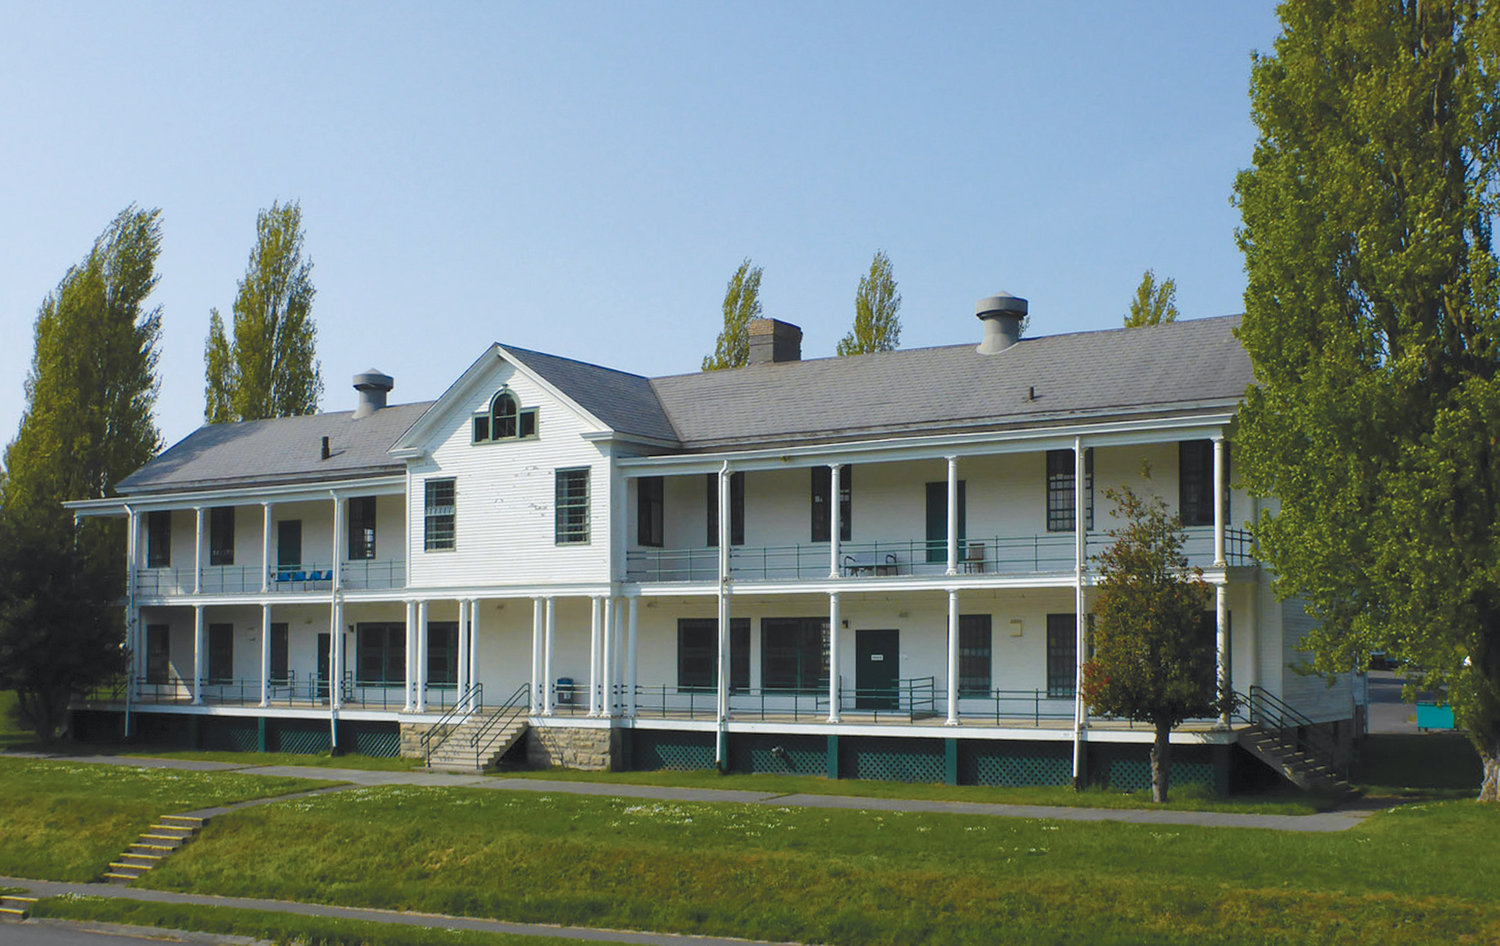 The Jefferson County Public Infrastructure Fund board approved a $150,000 grant to the Fort Worden Public Development Authority to renovate the historic barracks for employee housing.